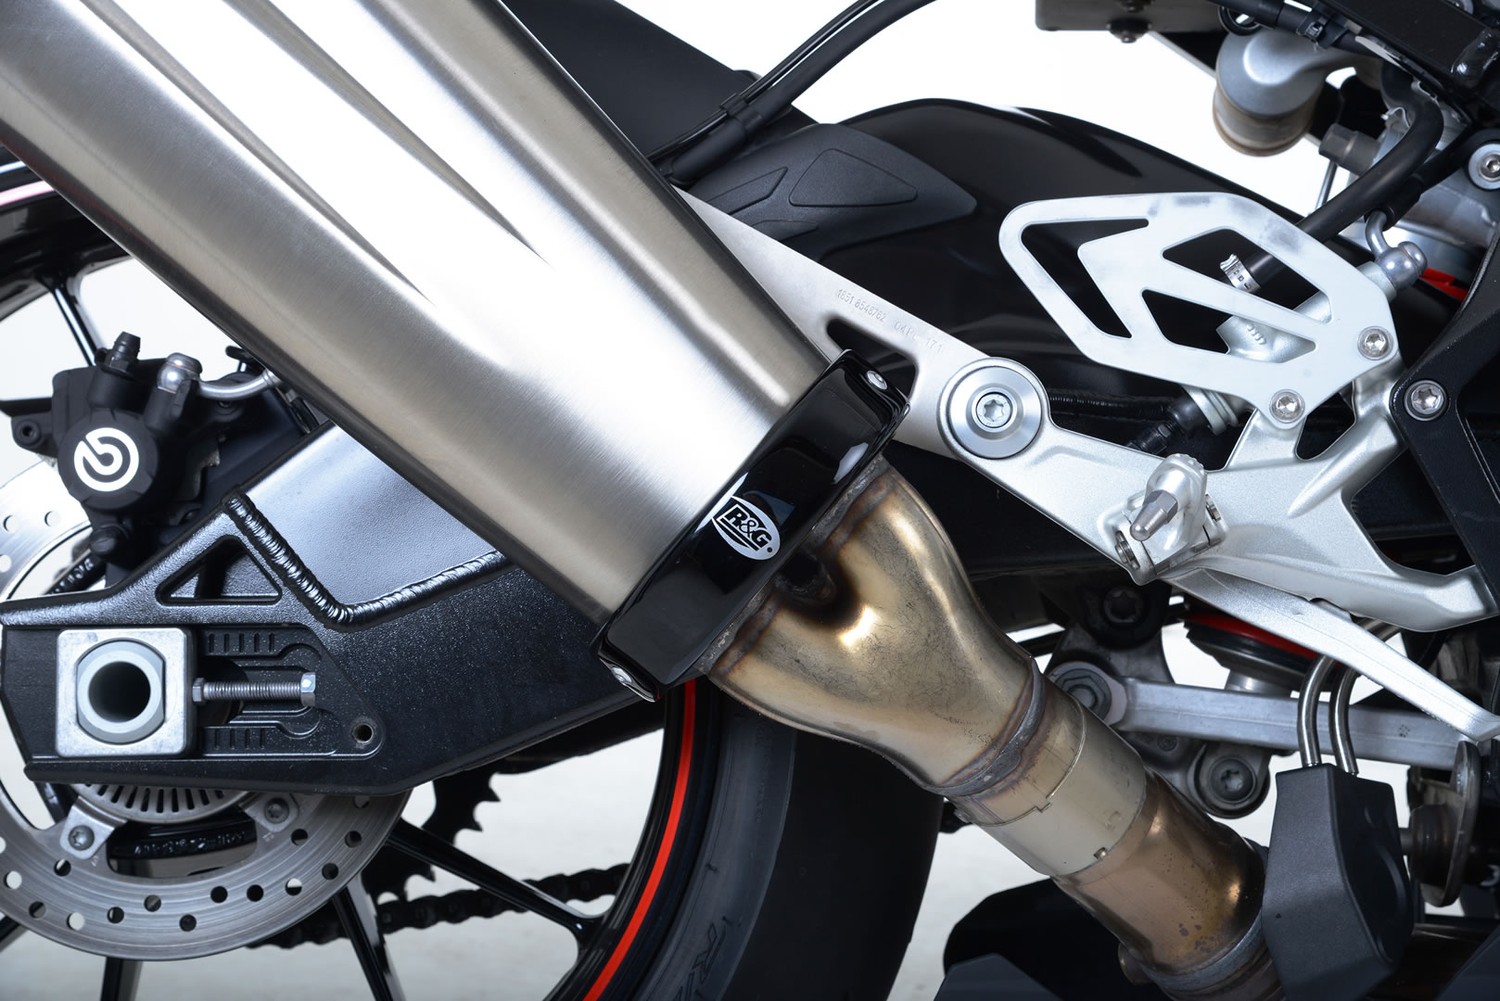 Silencer//Exhaust Protector Can Cover For BMW S1000RR S1000R K1200S K1200R